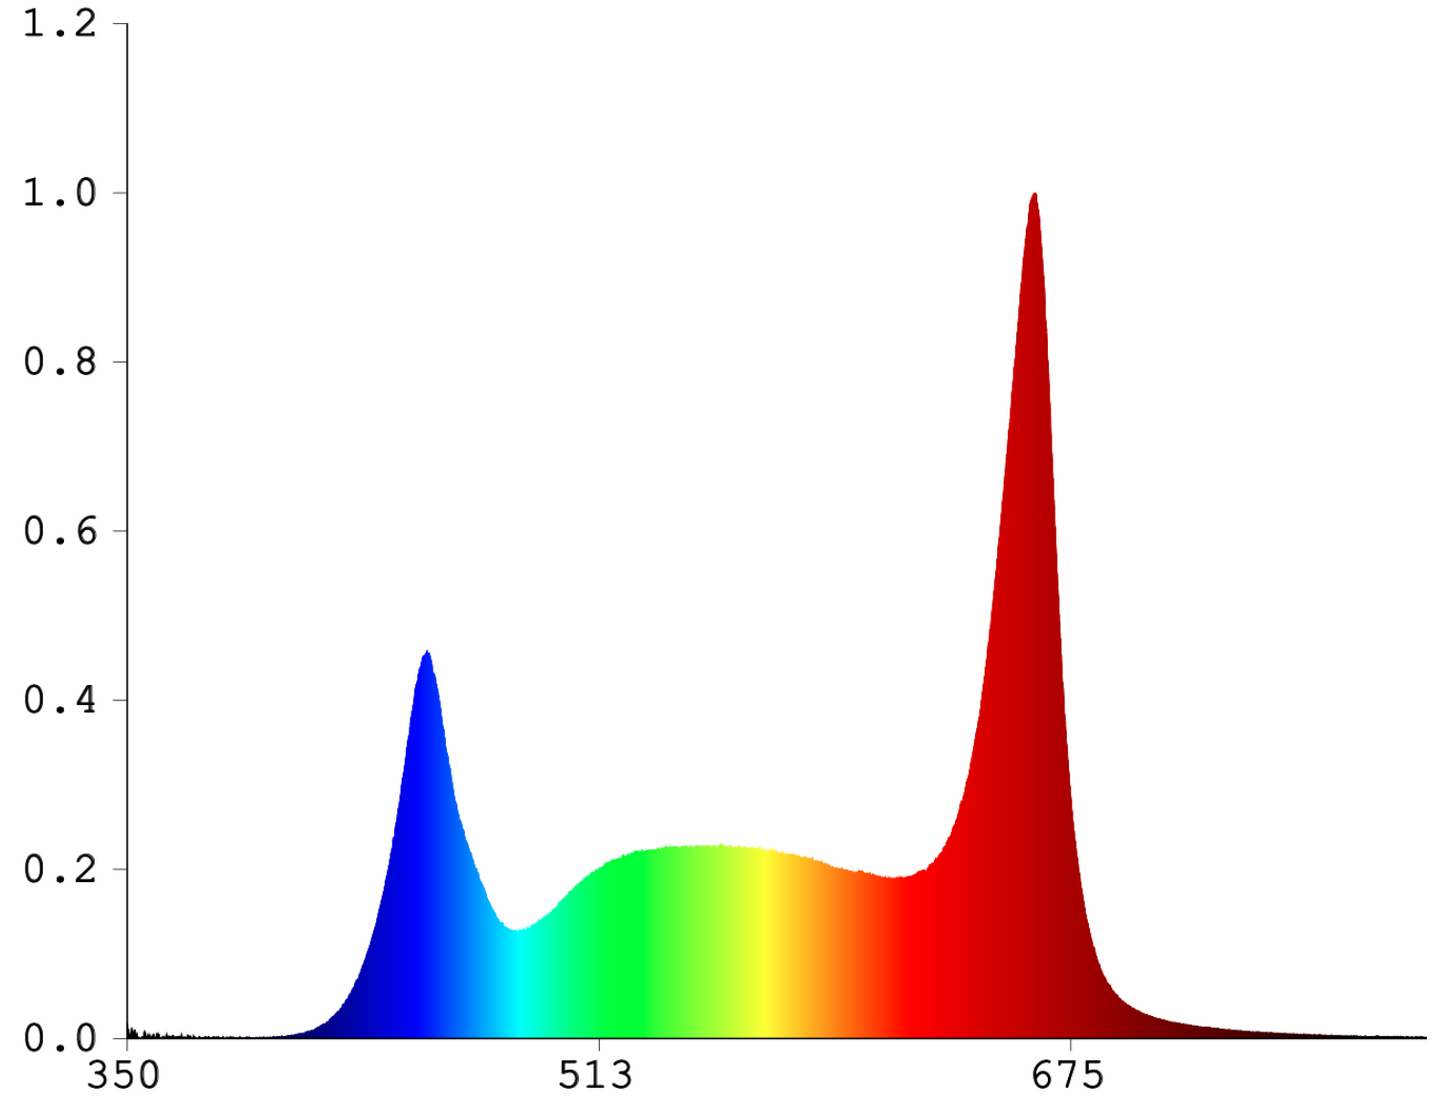 HortiPower Nurser 3 spectrum graph with peak in red and blue